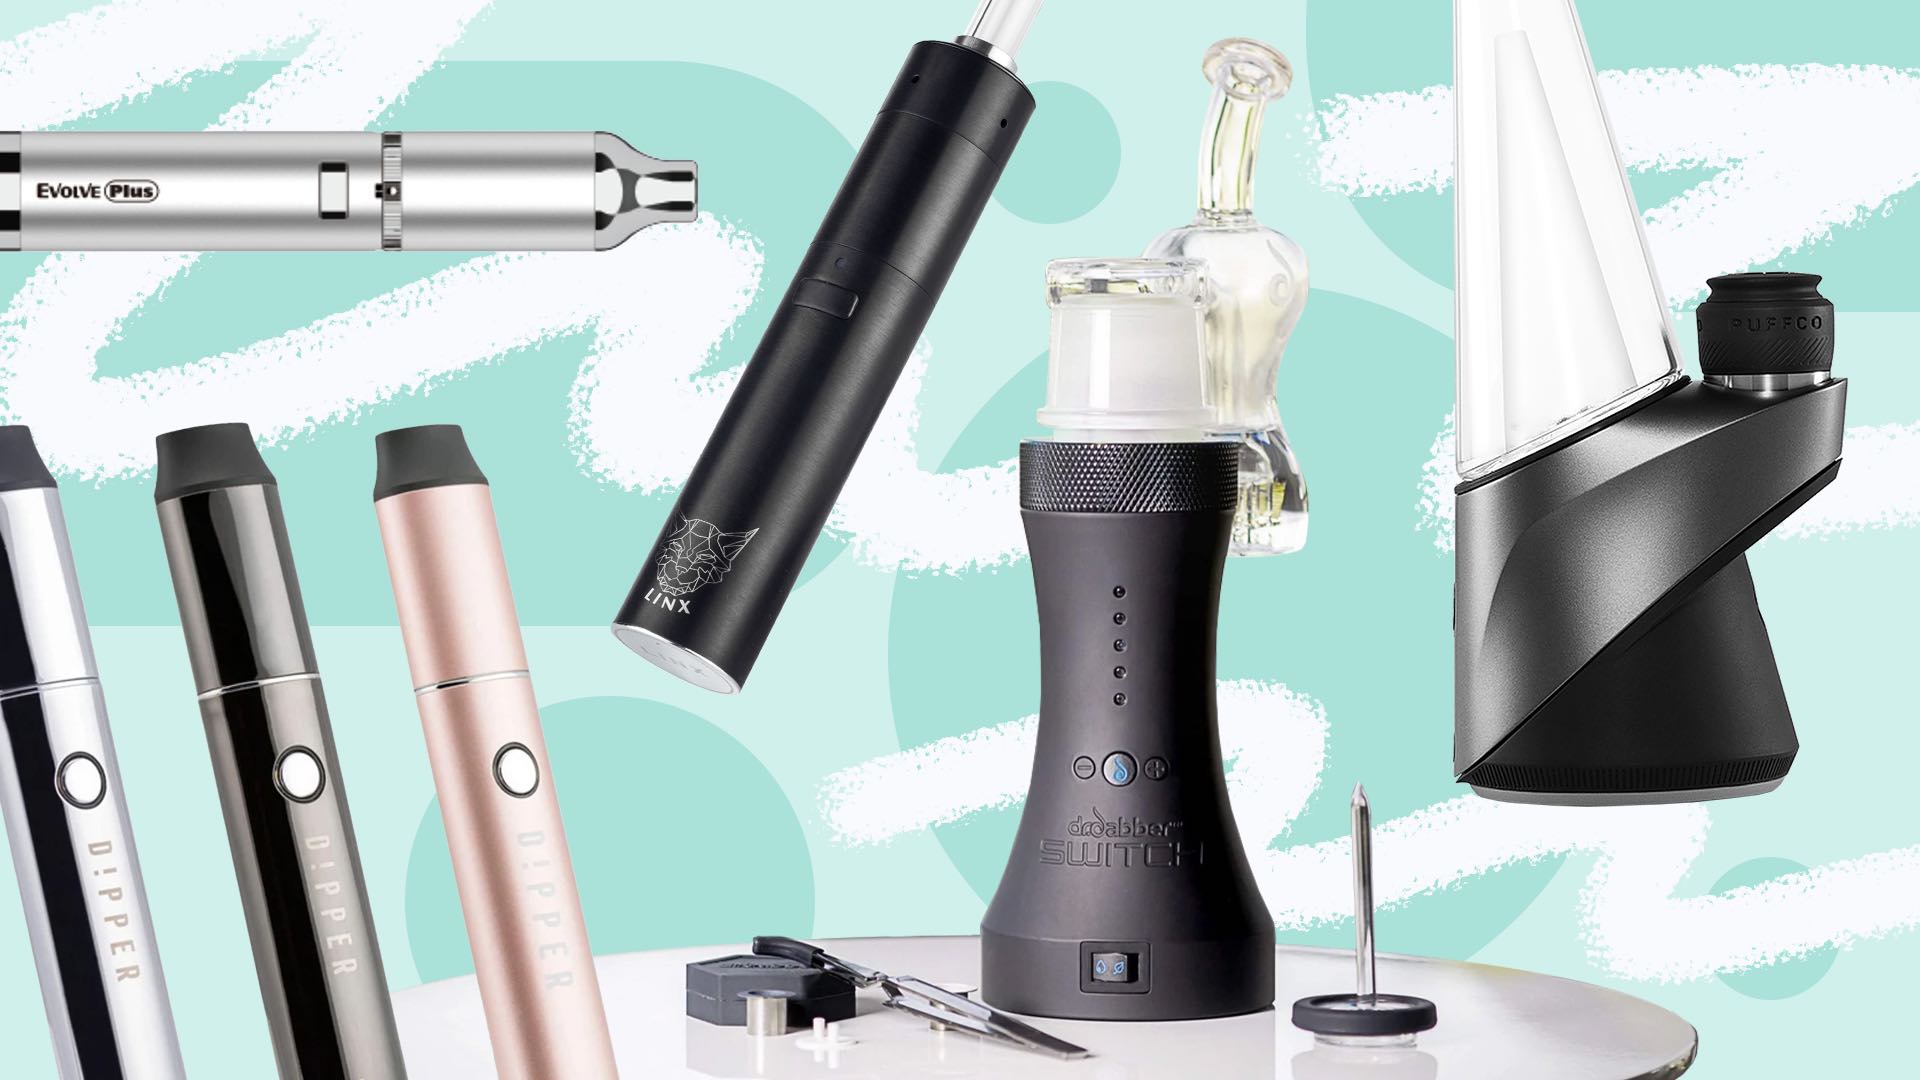 The best vaporizers for cannabis oil and concentrates | Leafly